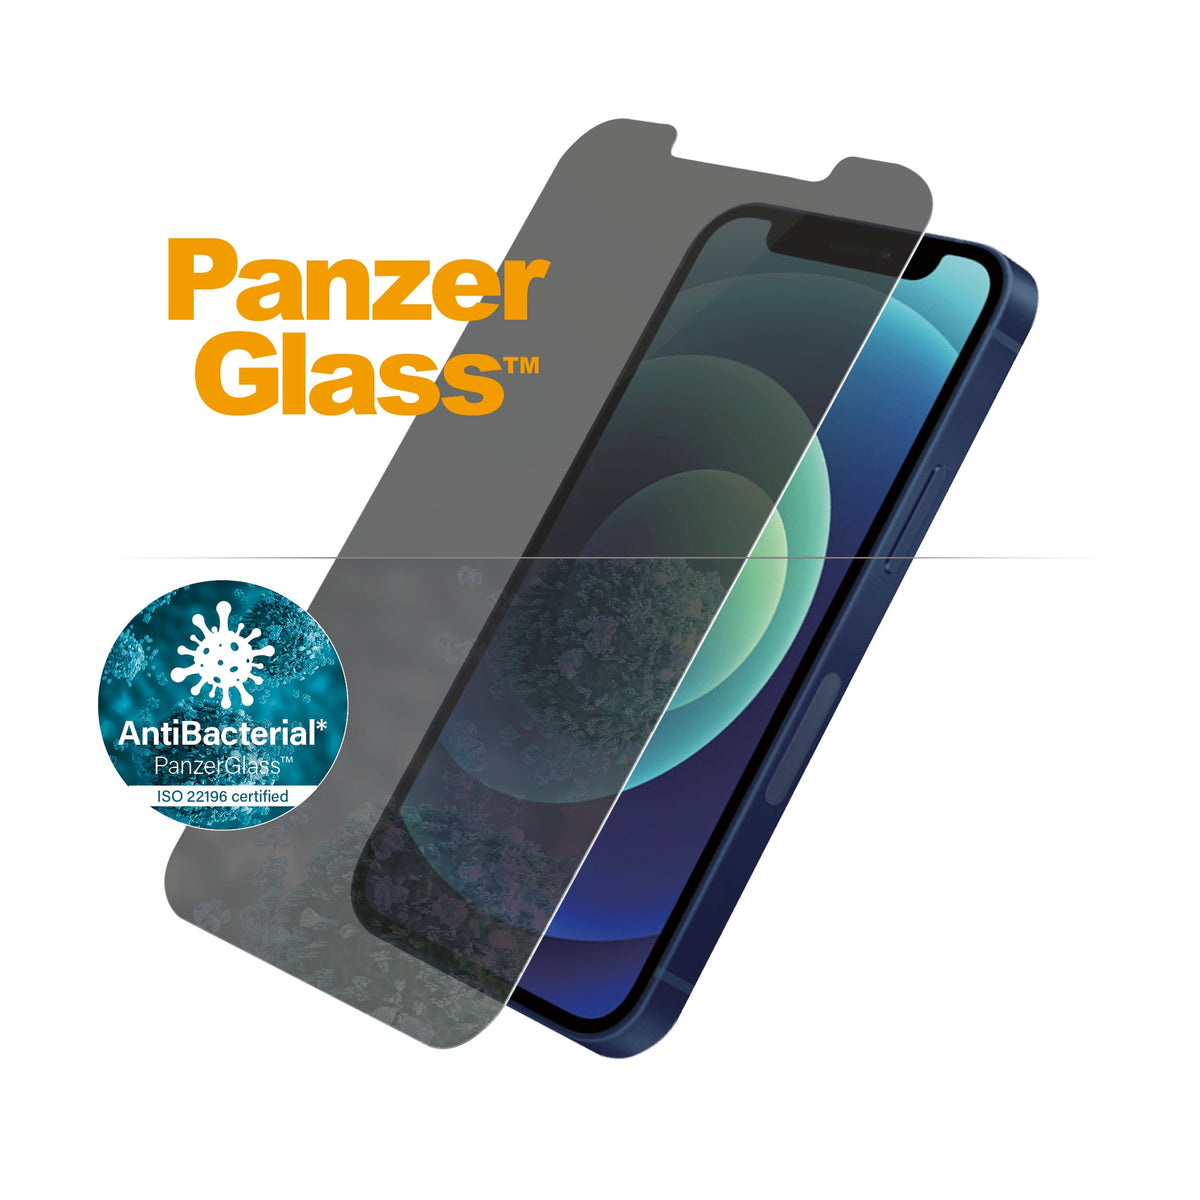 [OPEN BOX] PANZERGLASS iPhone 12 Mini - Standard Fit Tempered Glass Screen Protector w/ Anti-Microbial - Privacy